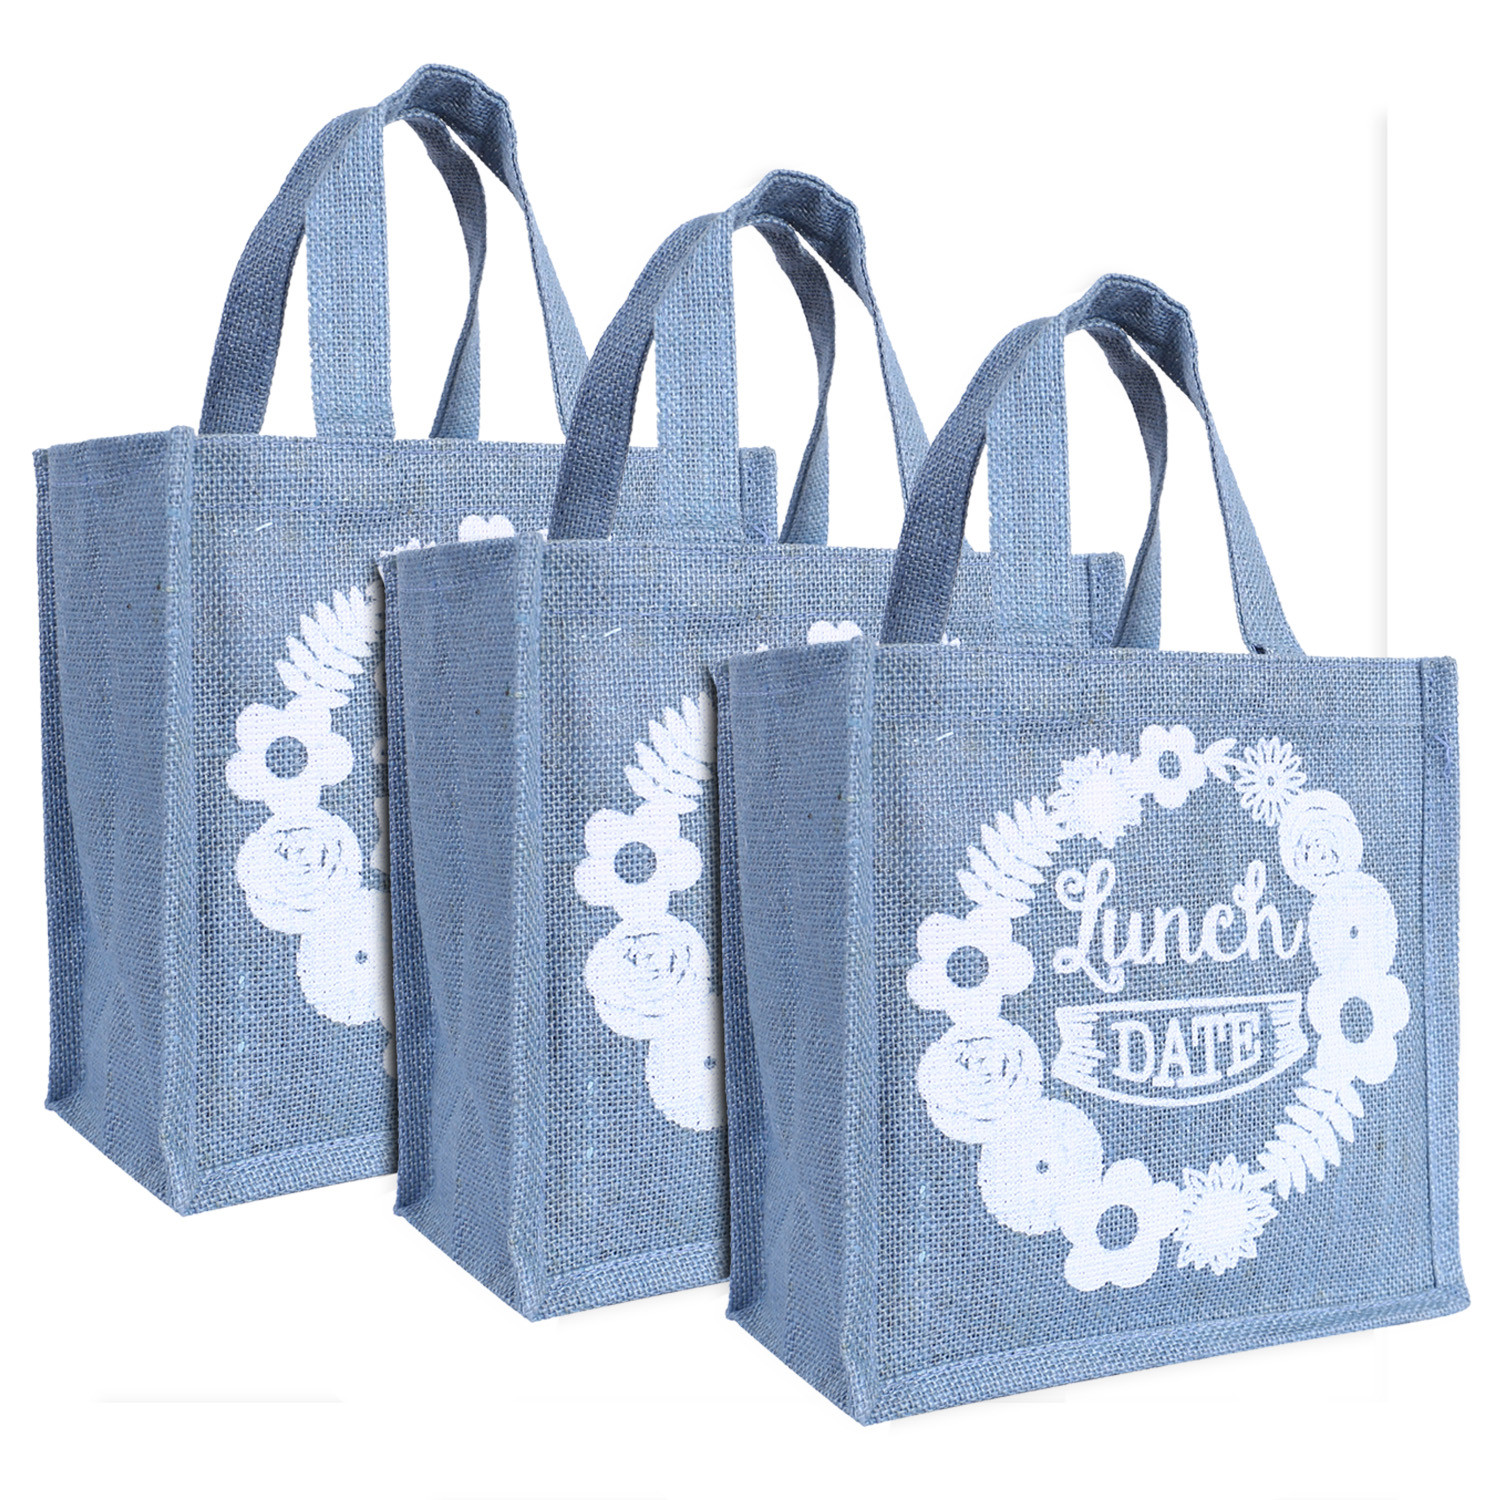 Kuber Industries Lunch Bag|Reusable Jute Fabric Tote Bag|Lunch Date Print Tiffin Carry Hand bag with Handle For office,School,Gift (Gray)